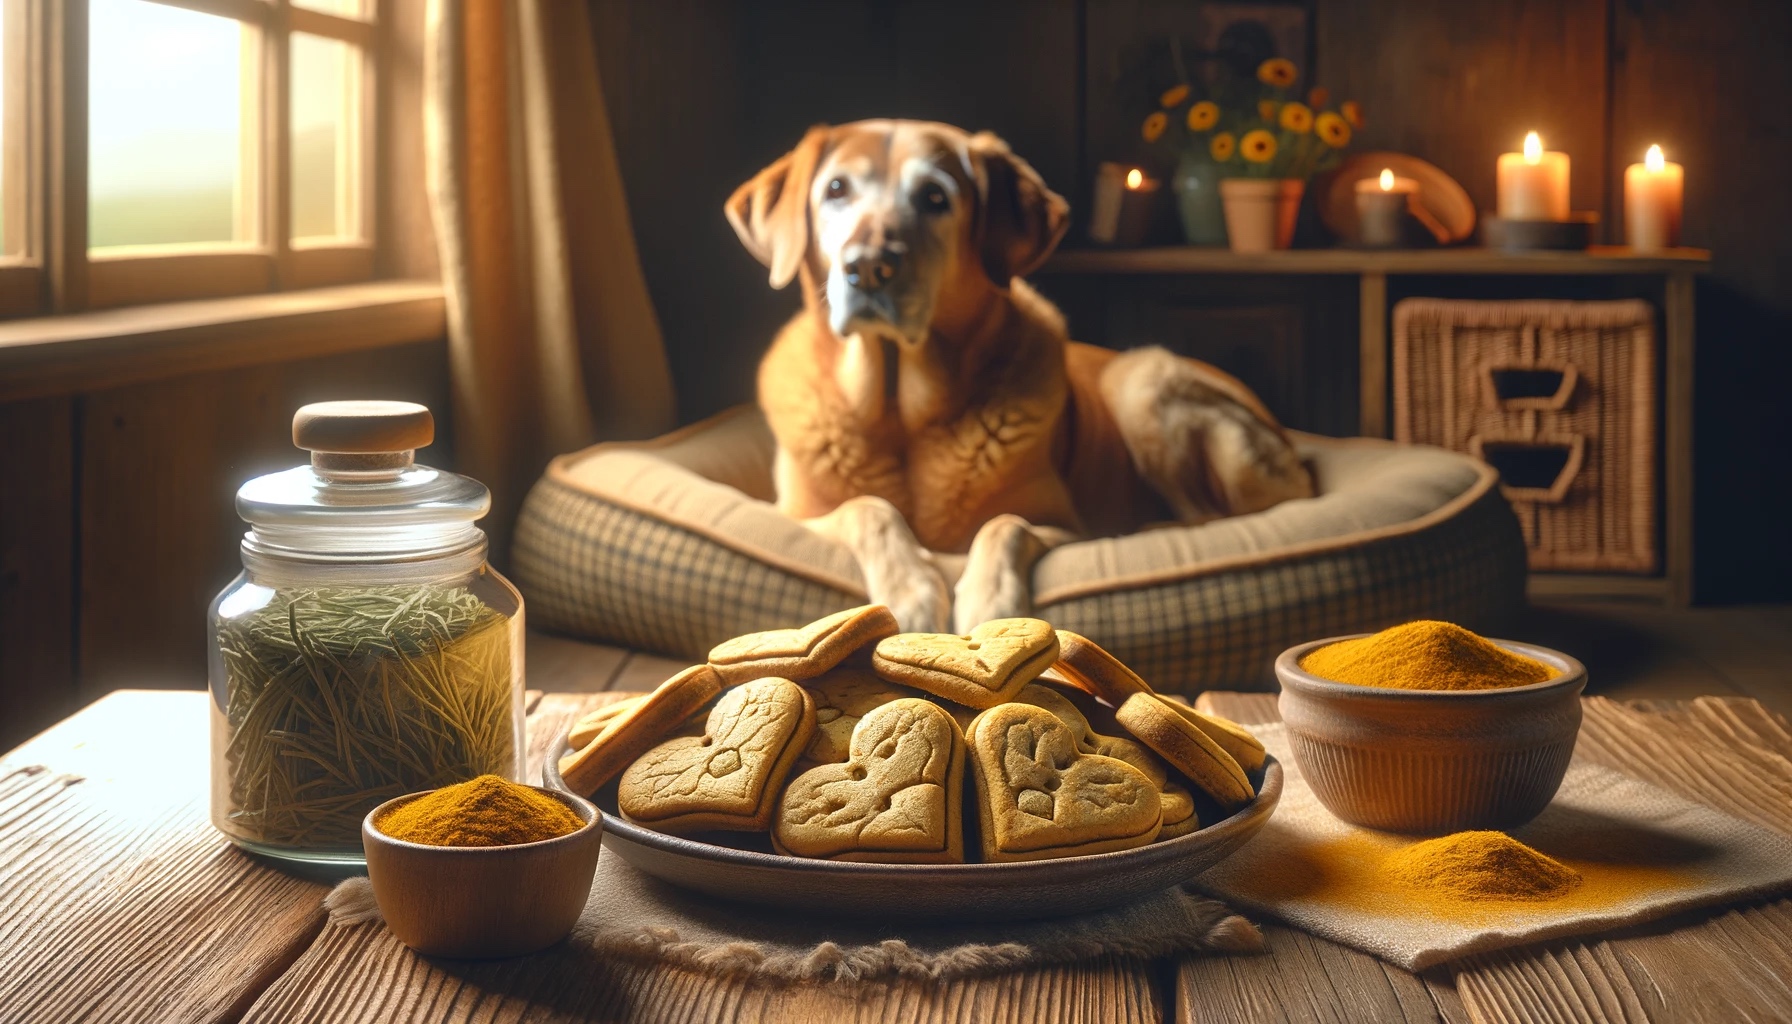 Arthritis Dog Biscuit Recipe with Alfalfa and Turmeric for Old Dogs